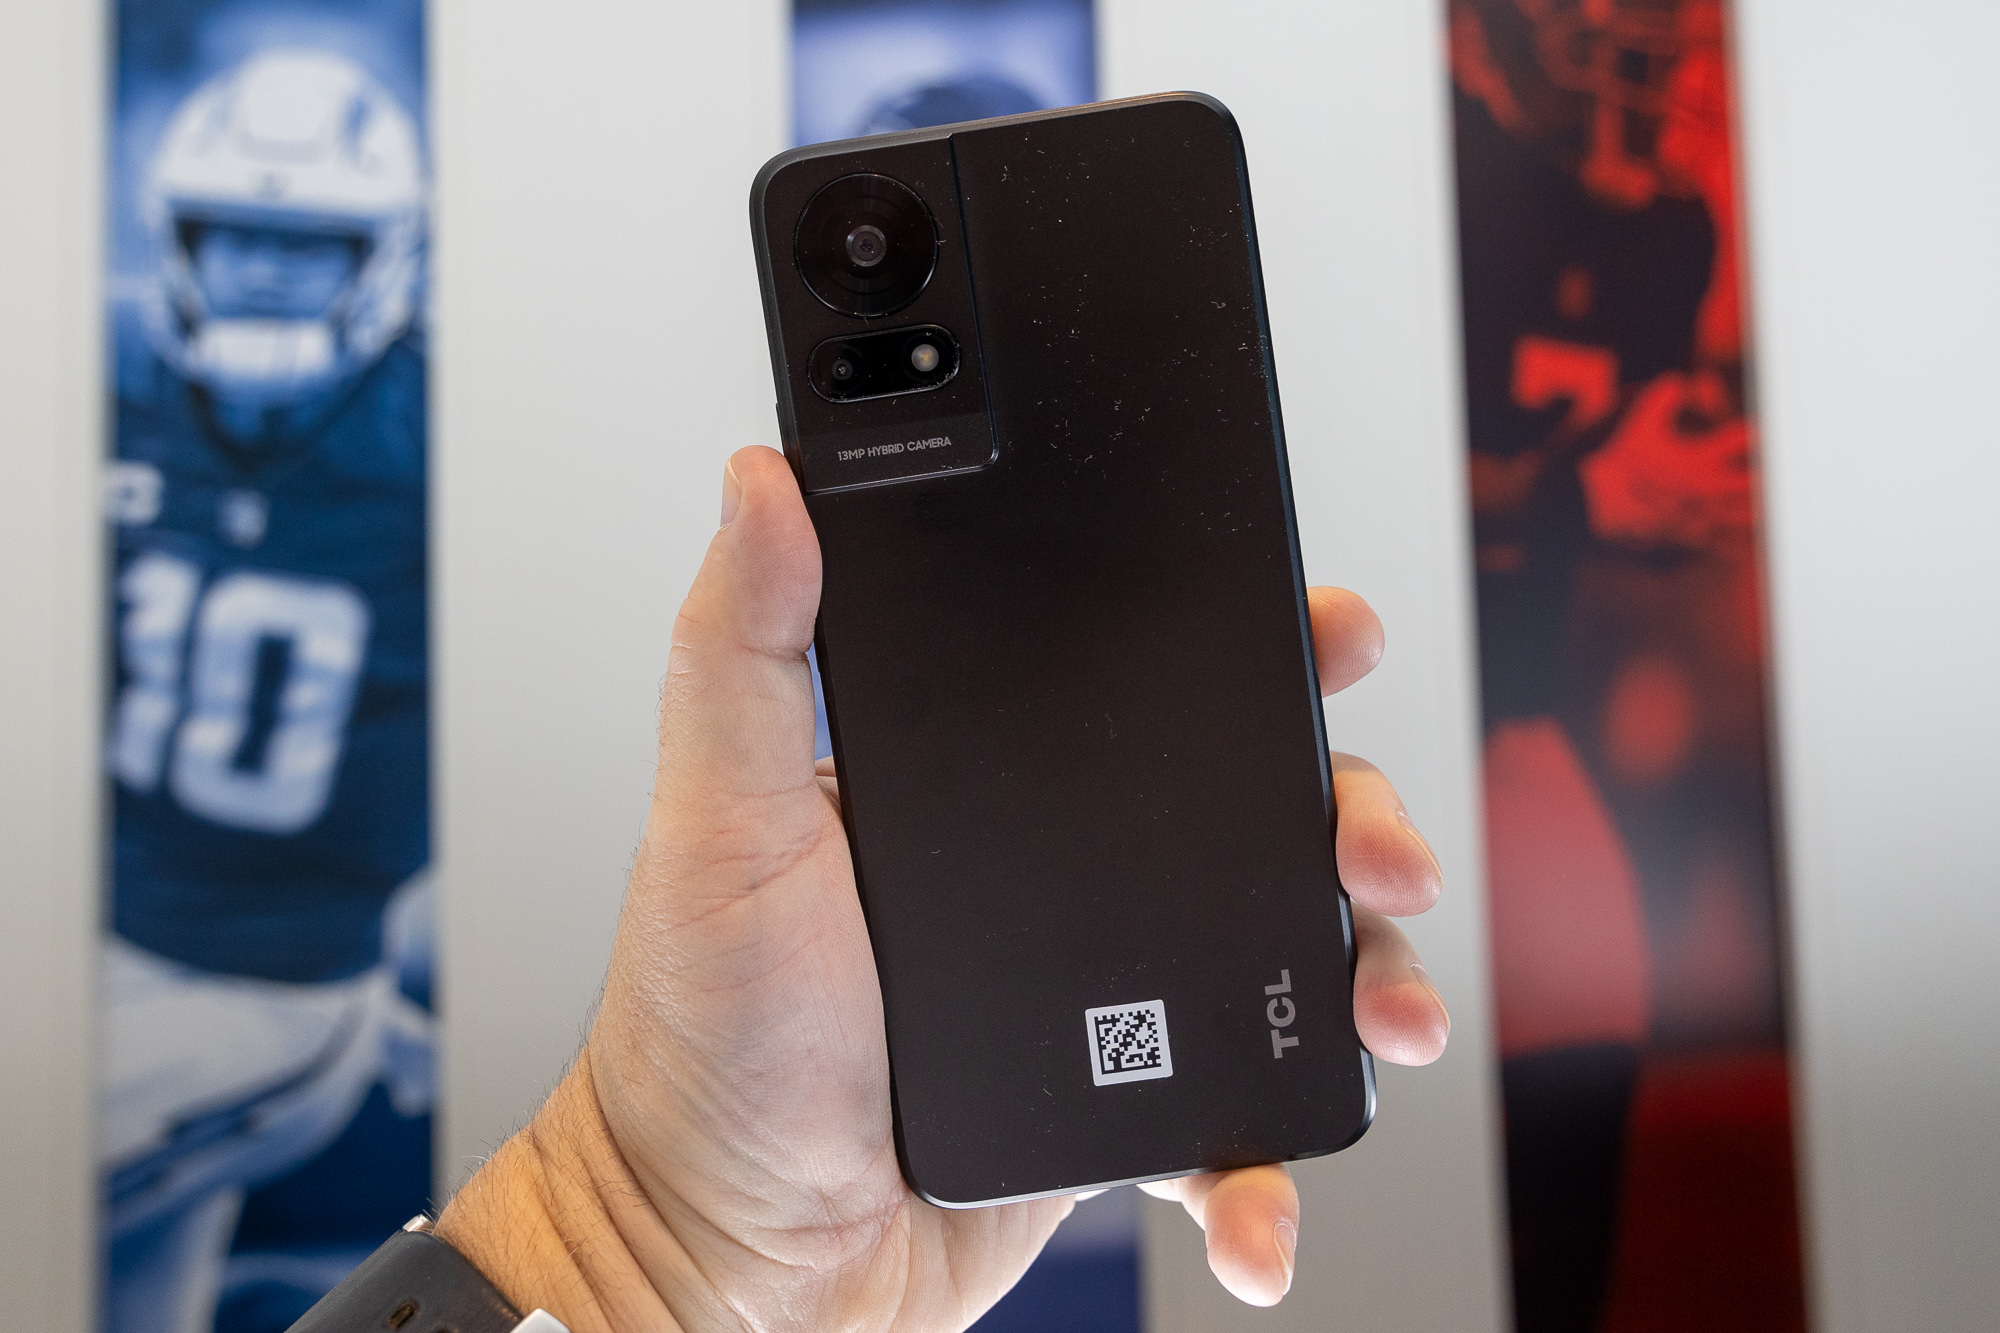 CES 2024: TCL 50 Smartphone Series With Dual Speakers, NXTPaper Tech  Officially Unveiled